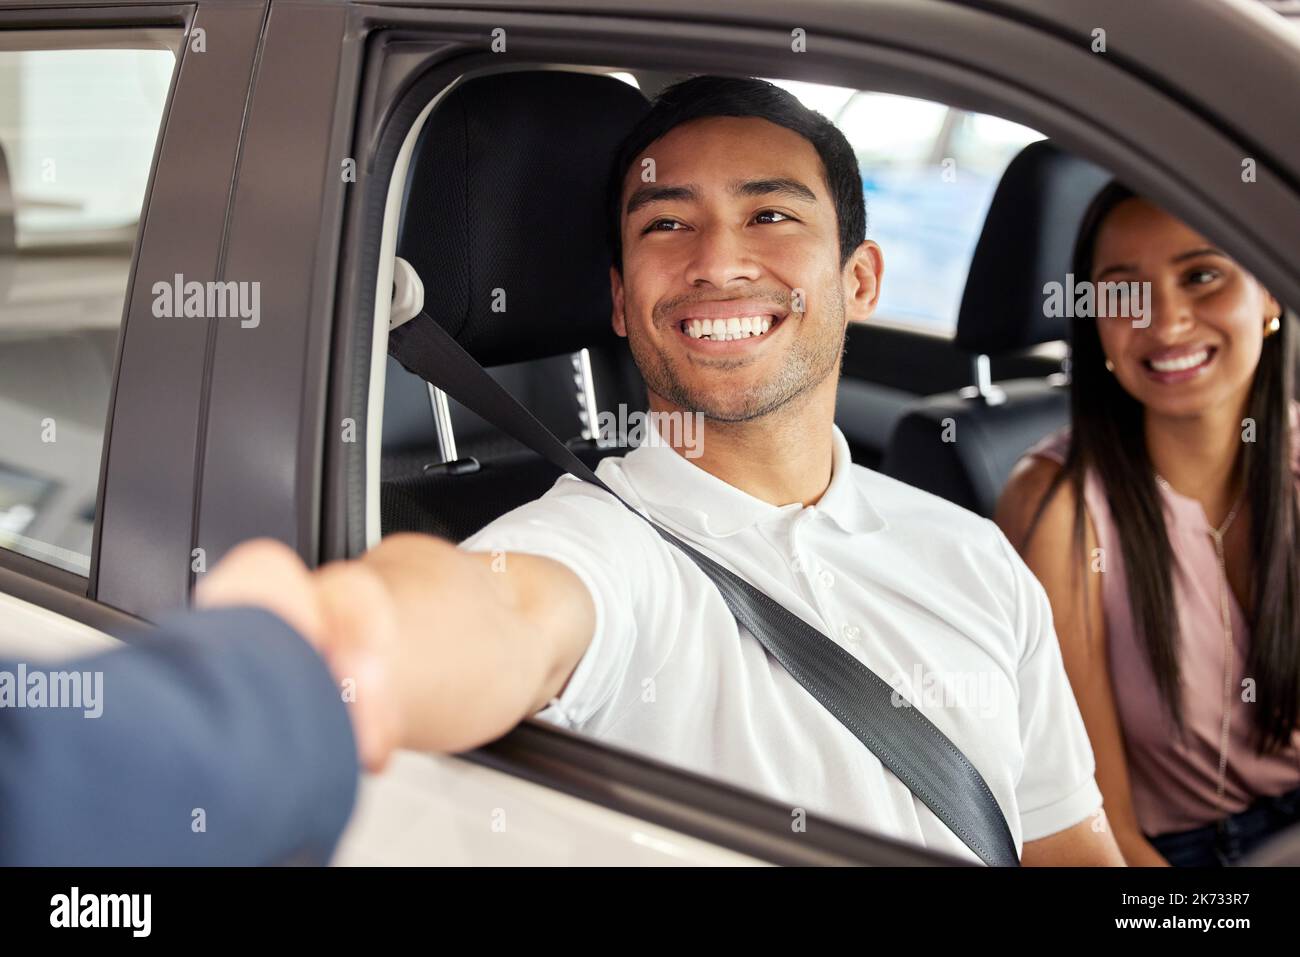 I wish you many happy miles in your new car. a young couple leaving a car dealership with their new car. Stock Photo